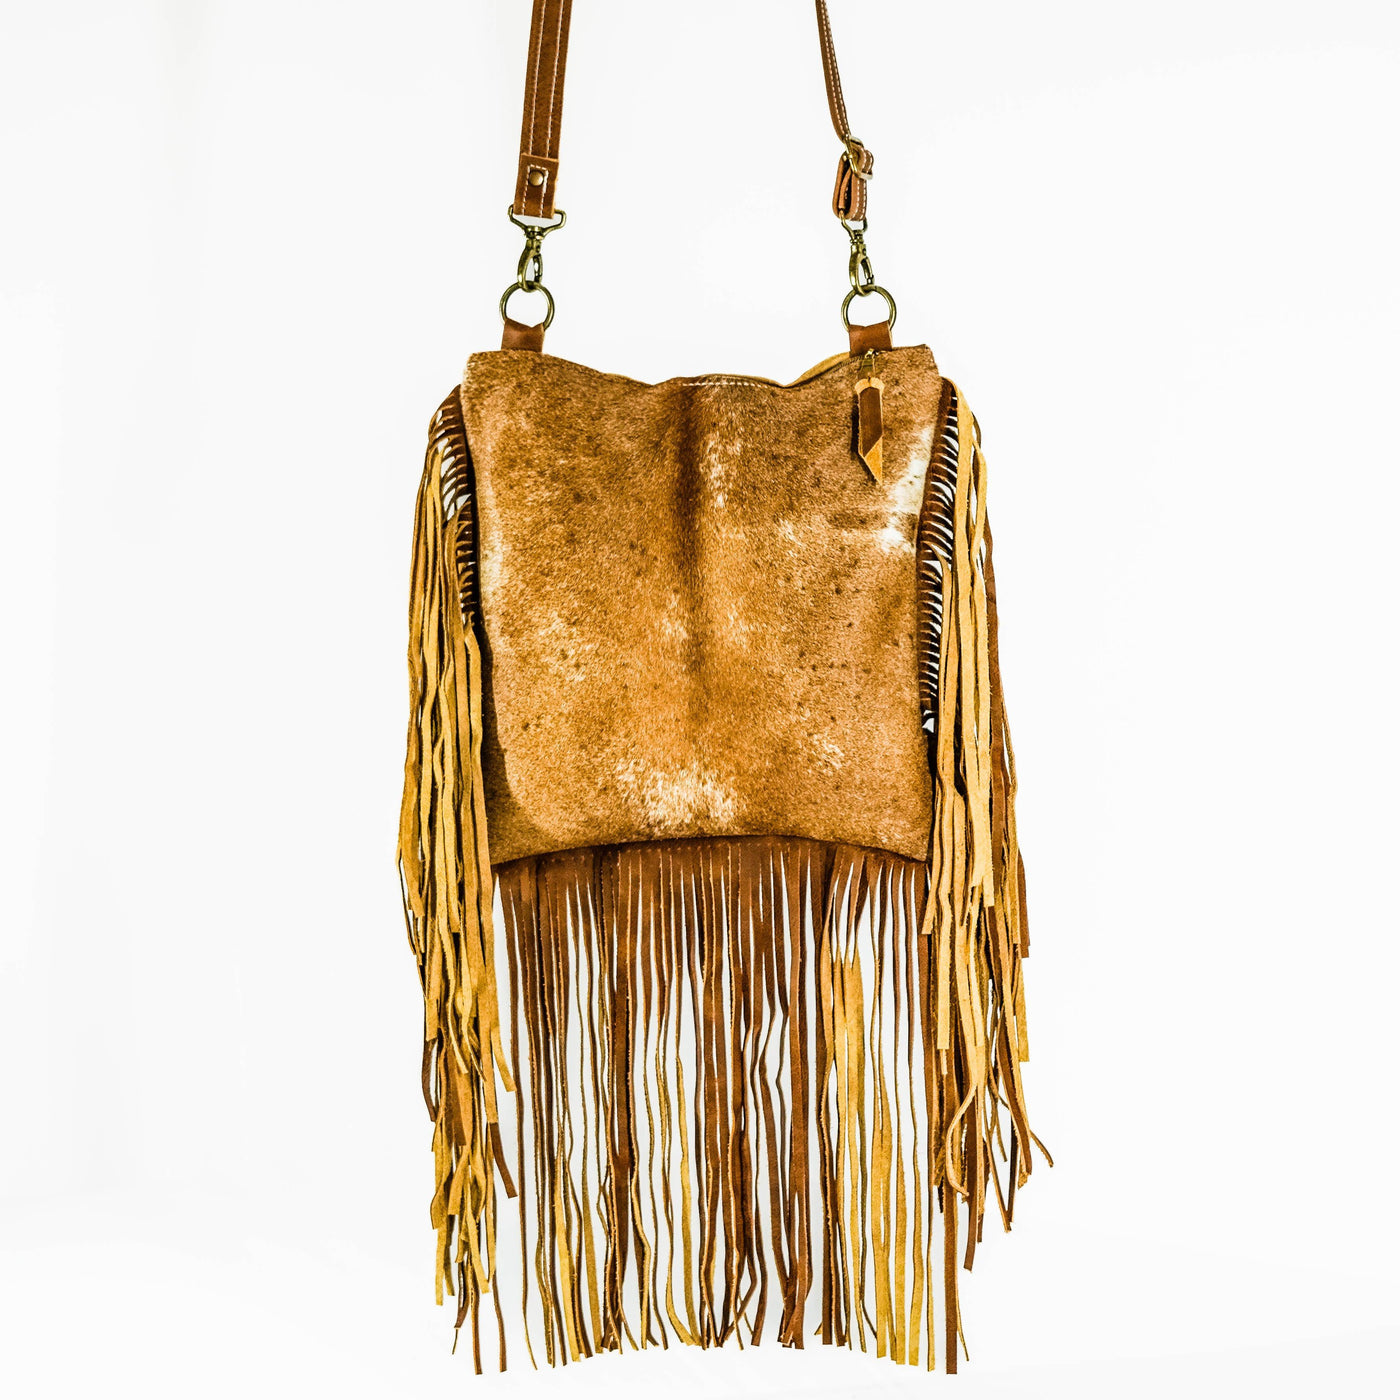 Shania (unlined) - Palomino Hide w/ No Embossed-Shania (unlined)-Western-Cowhide-Bags-Handmade-Products-Gifts-Dancing Cactus Designs